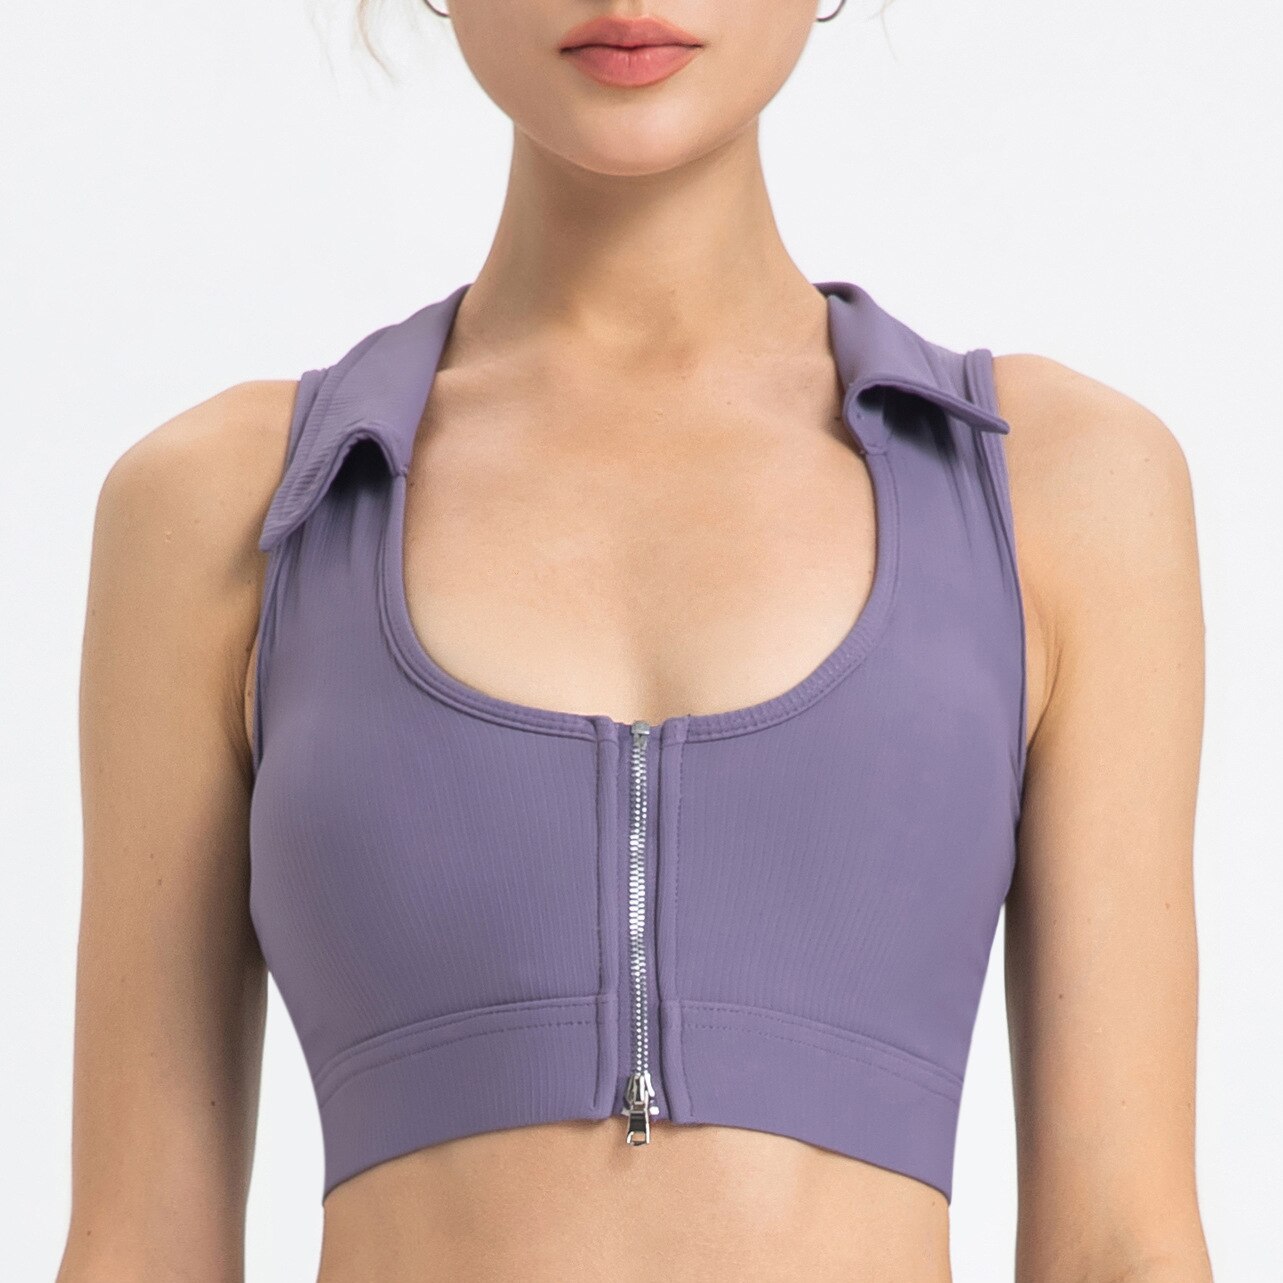 Sleeveless Cut-out yoga tops with Zipper , shorts or leggings